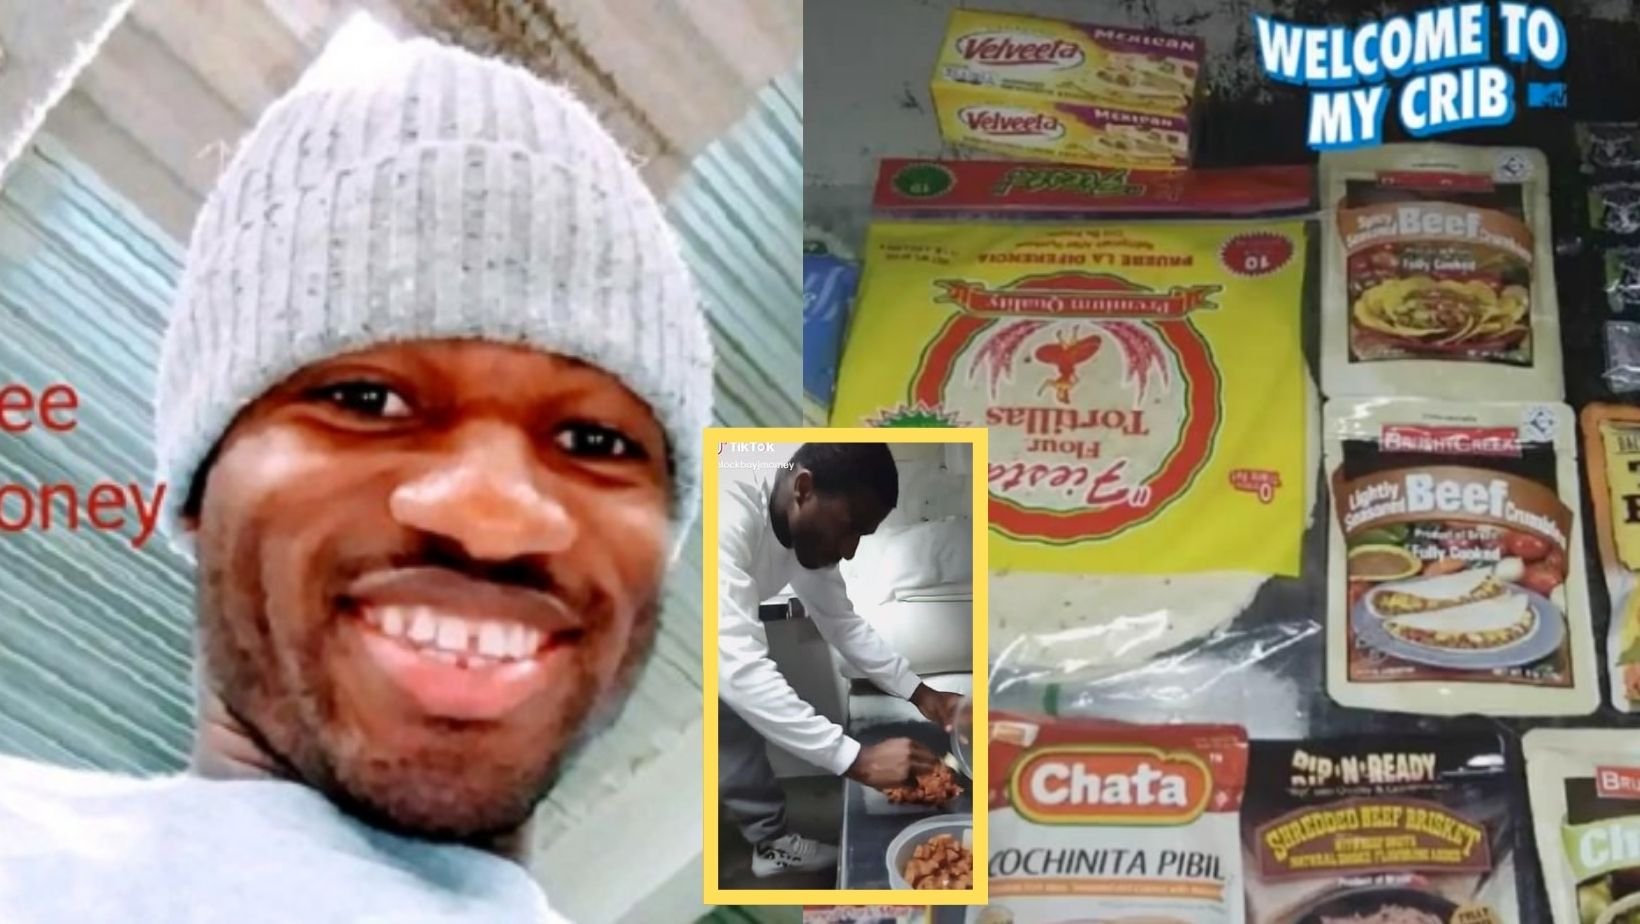 1 37.jpg?resize=412,232 - Inmate Went Viral After Launching His Own TikTok Cooking Show While Serving Time In Prison